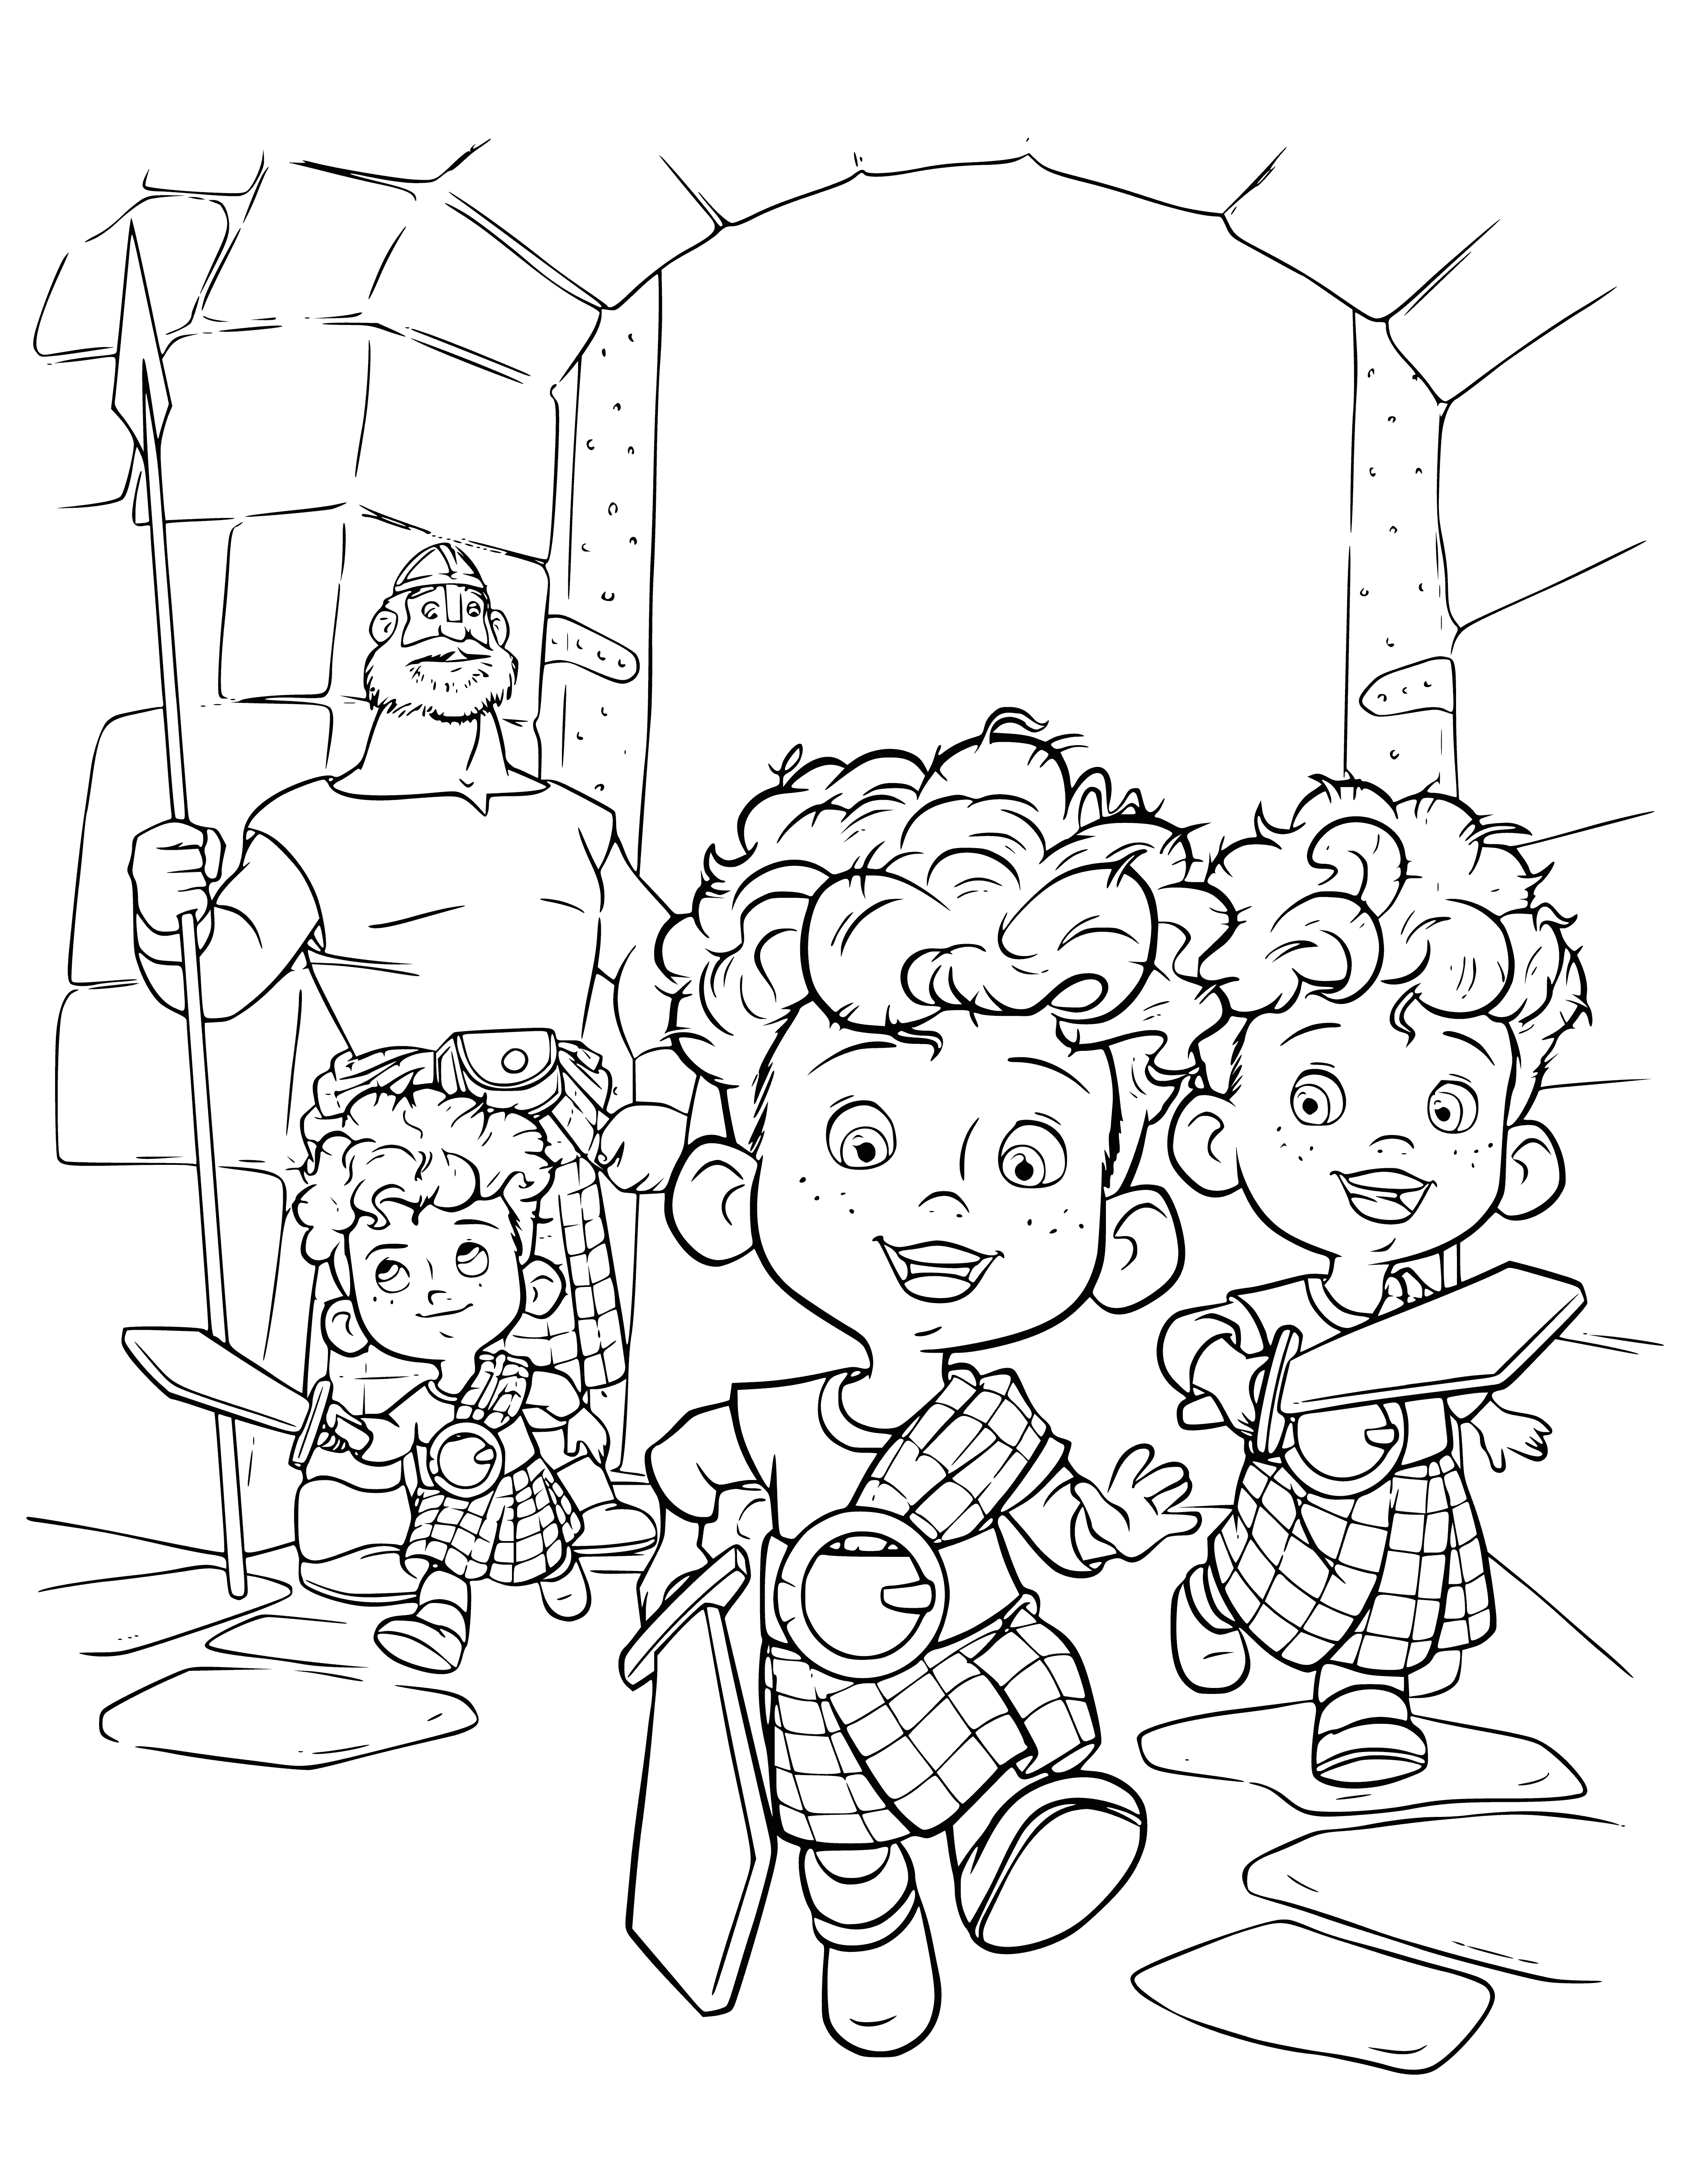 Brothers Merida coloring page